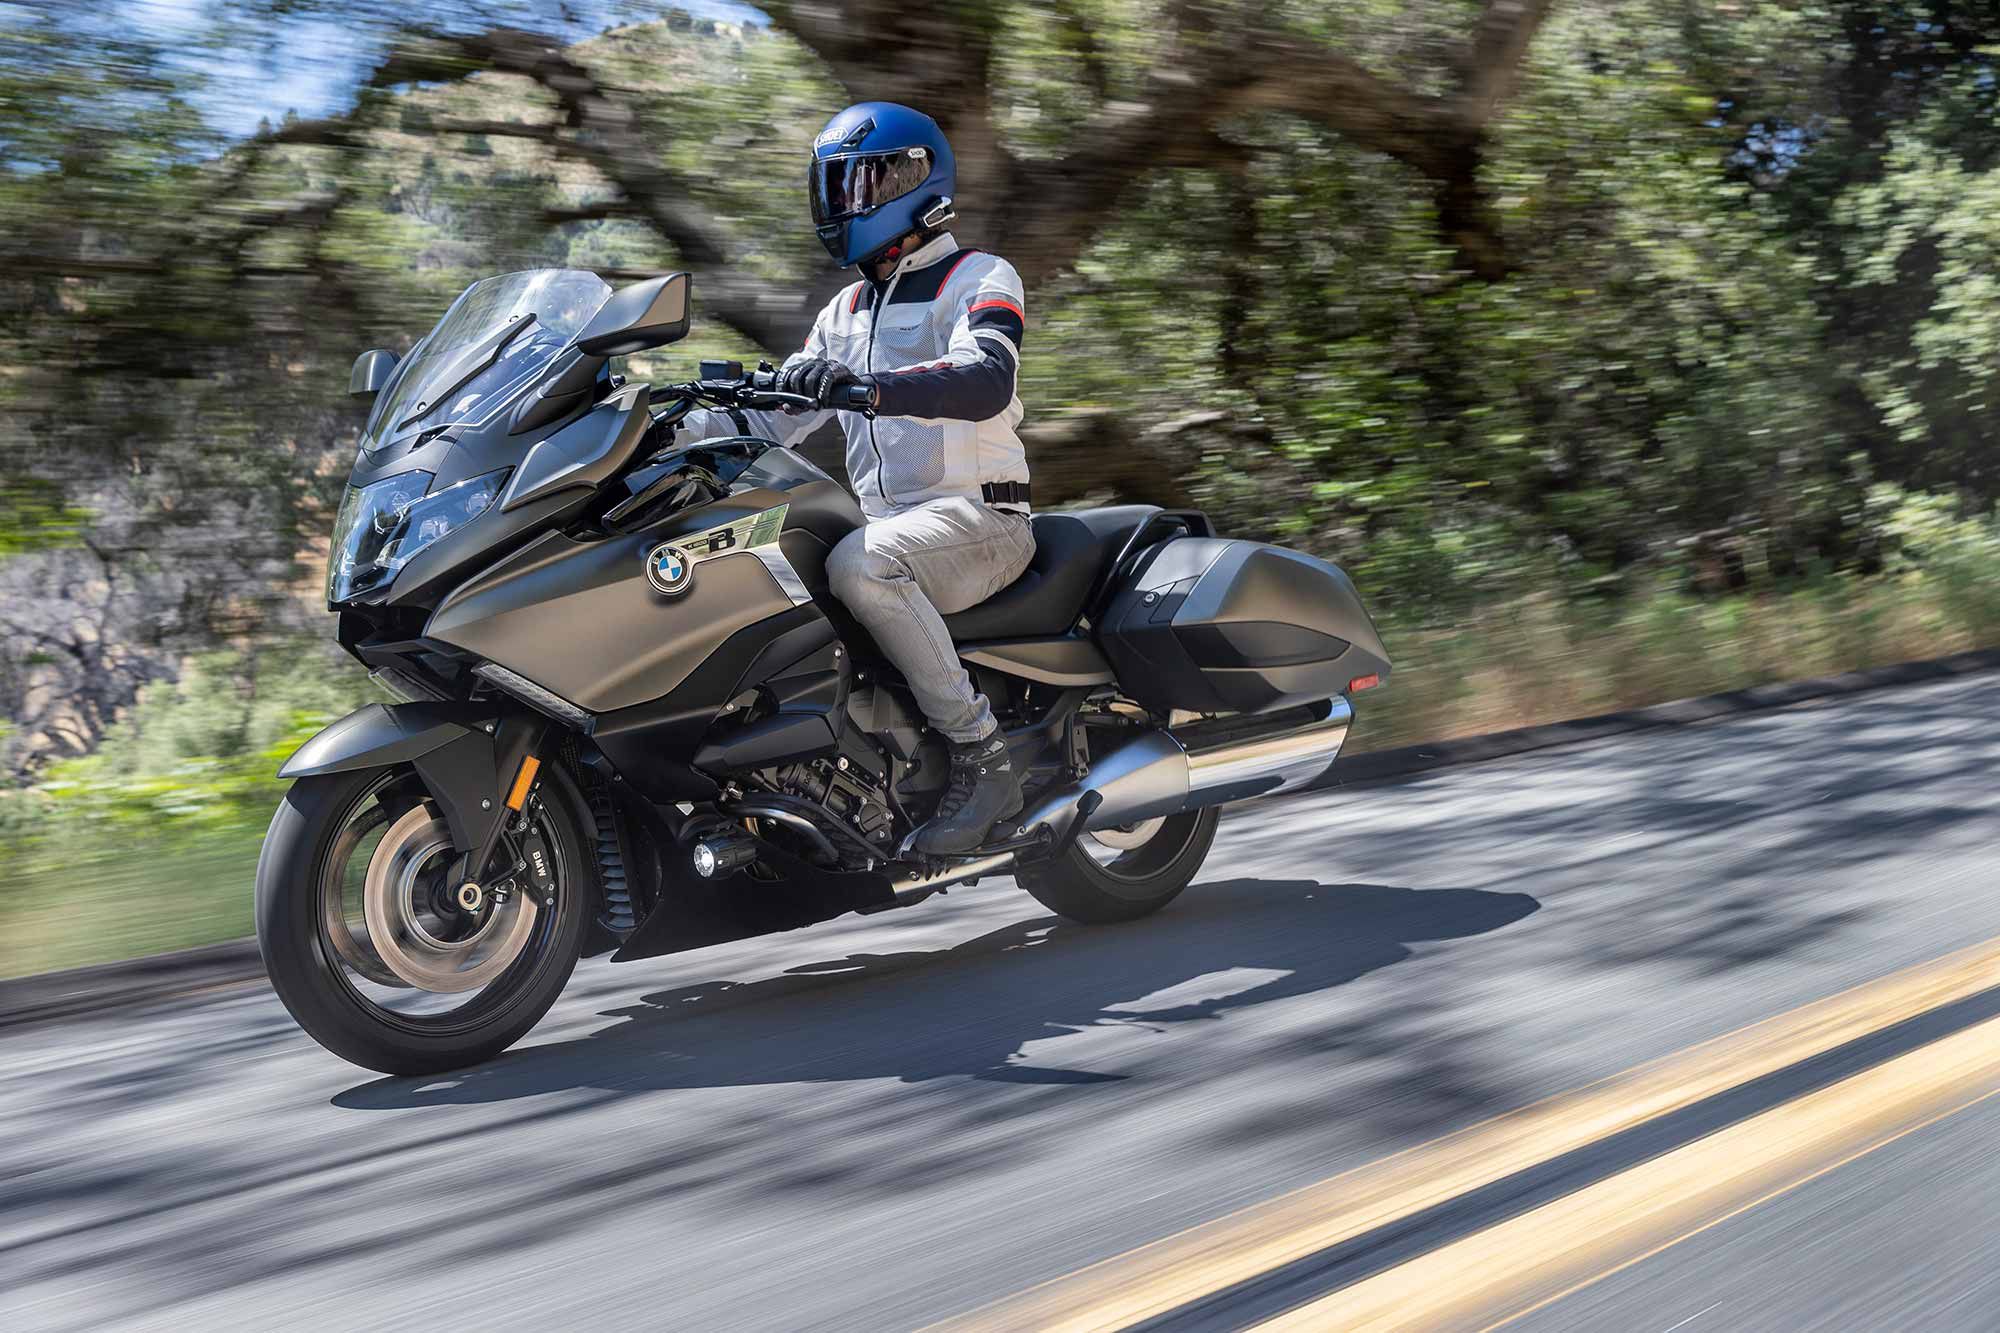 Motorcycle riders who cover serious distances will value the K 1600 B’s posh cockpit. Its generous 7-gallon fuel tank is another nice plus.